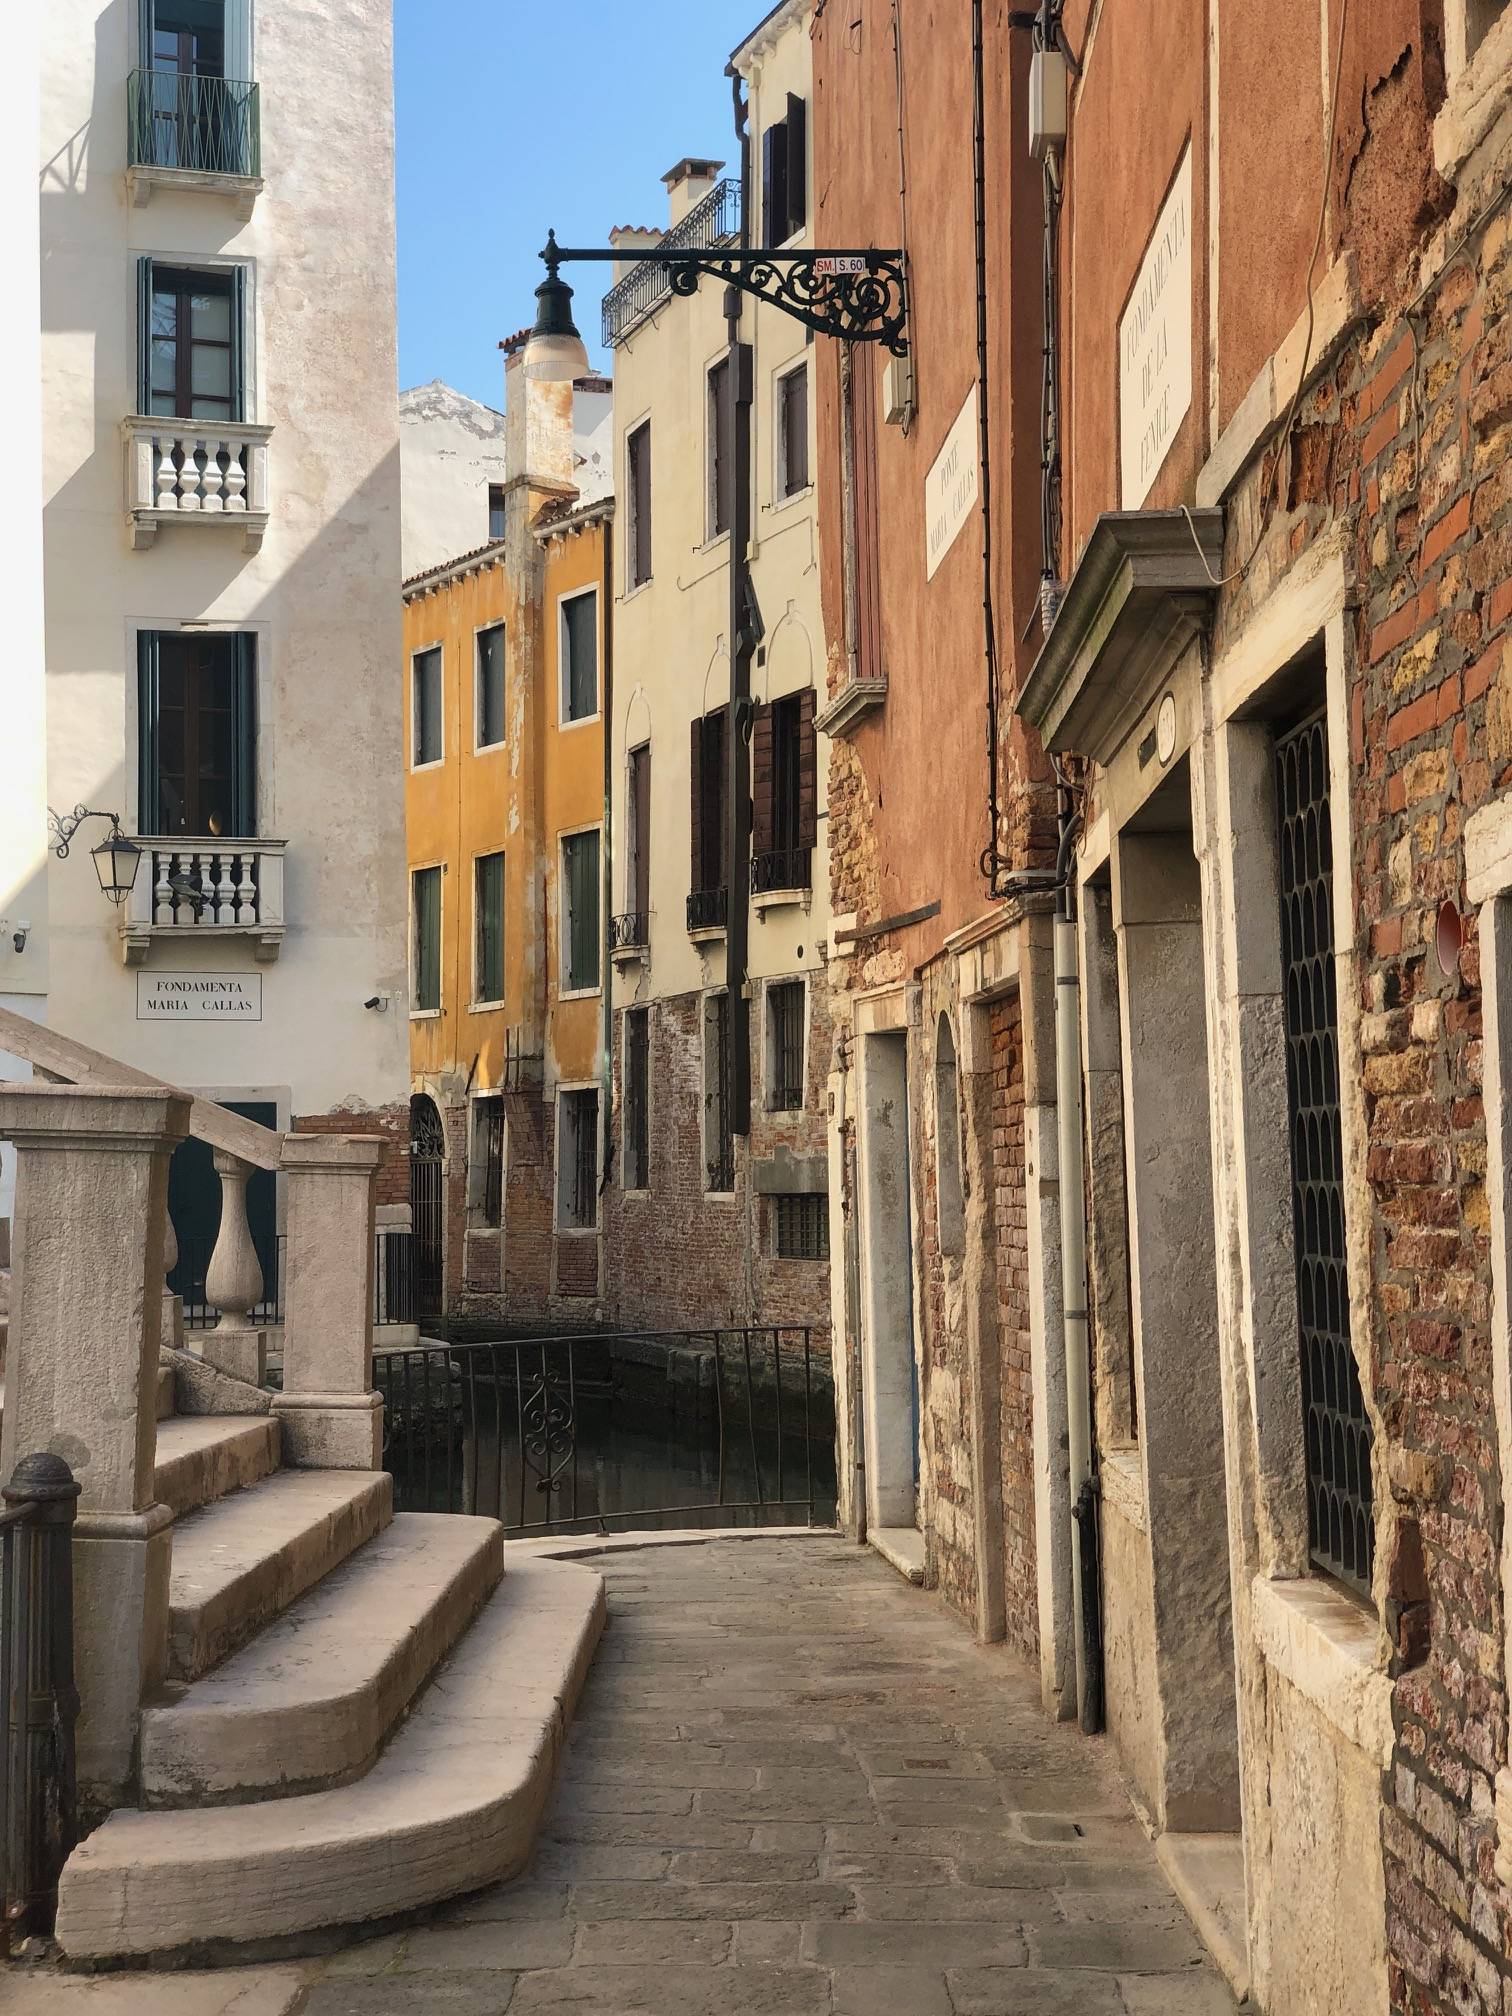 Journaling into Being: Writing Life – Venice